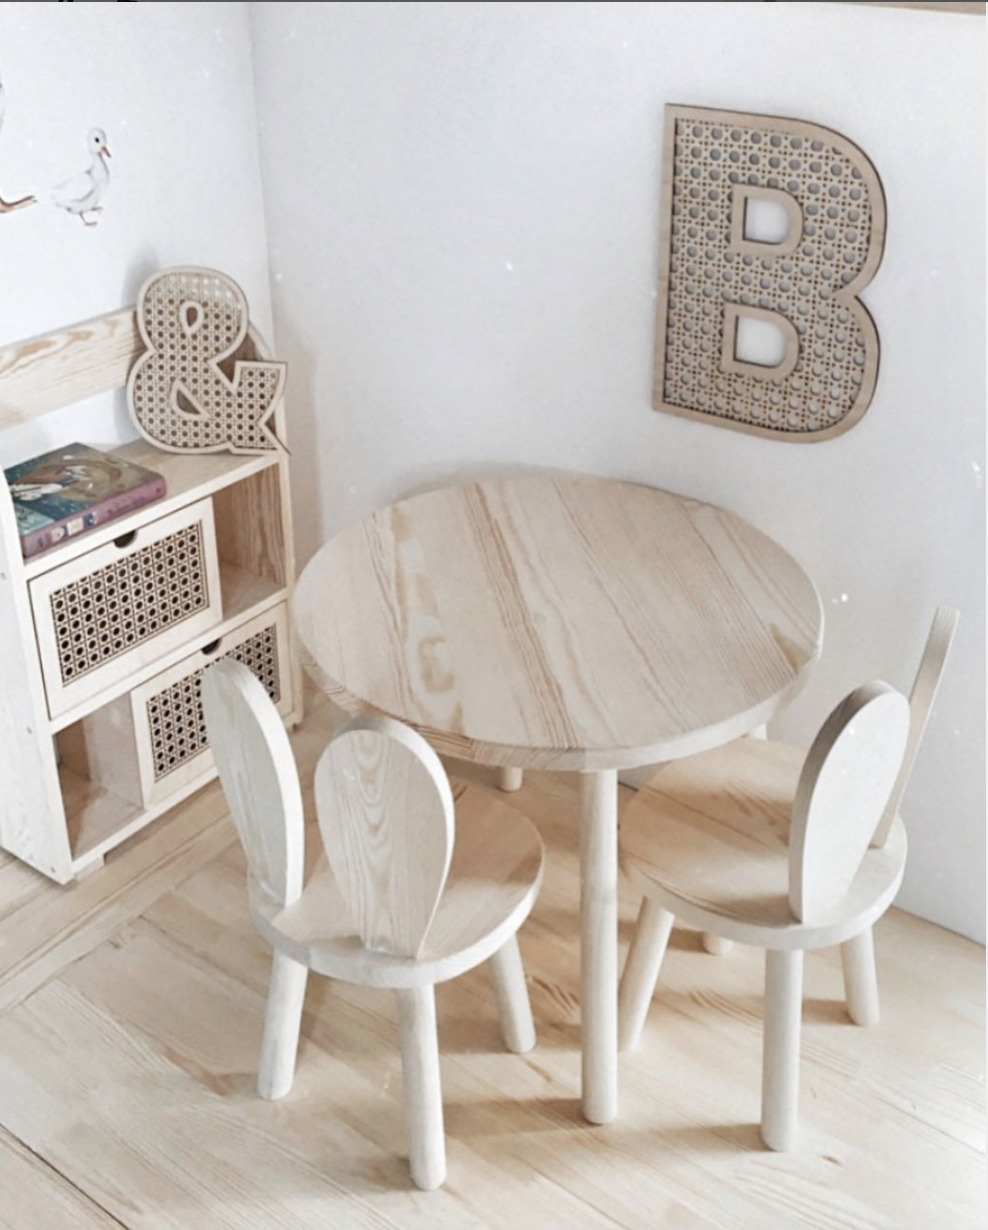 Nature furniture set for children, two rabbit chairs and table 